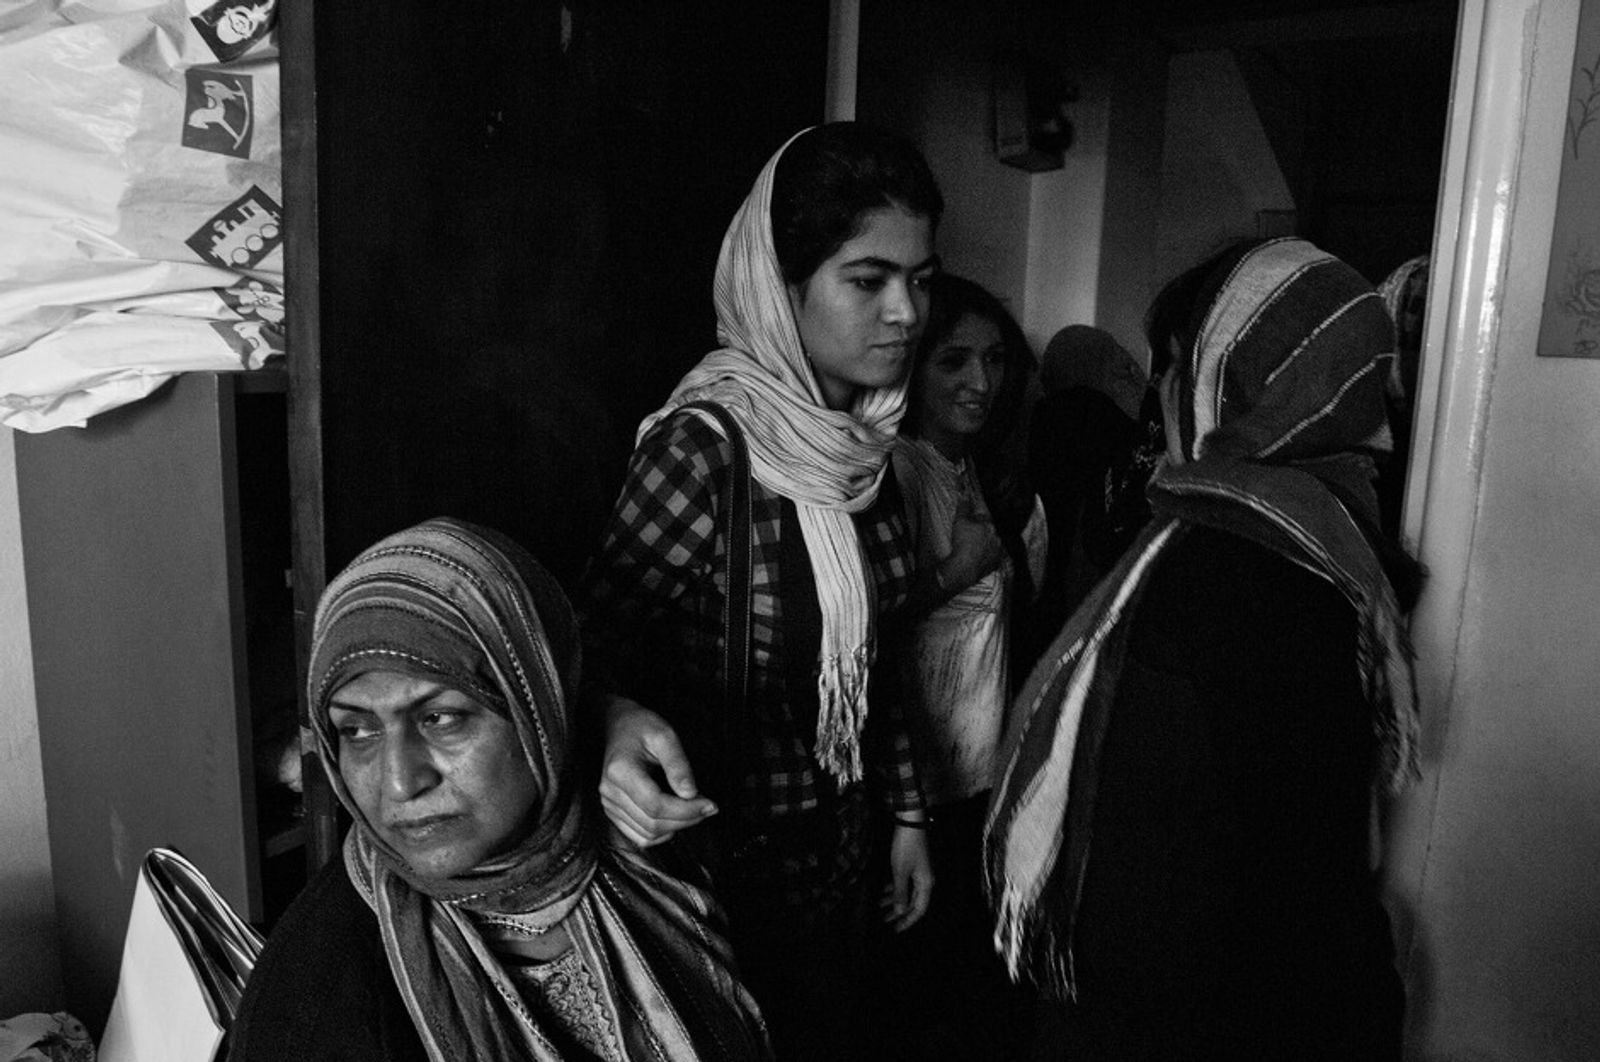 © Stephen Boyle - Afghan women queue for free clothing organised by a charity in central Athens. October 2012